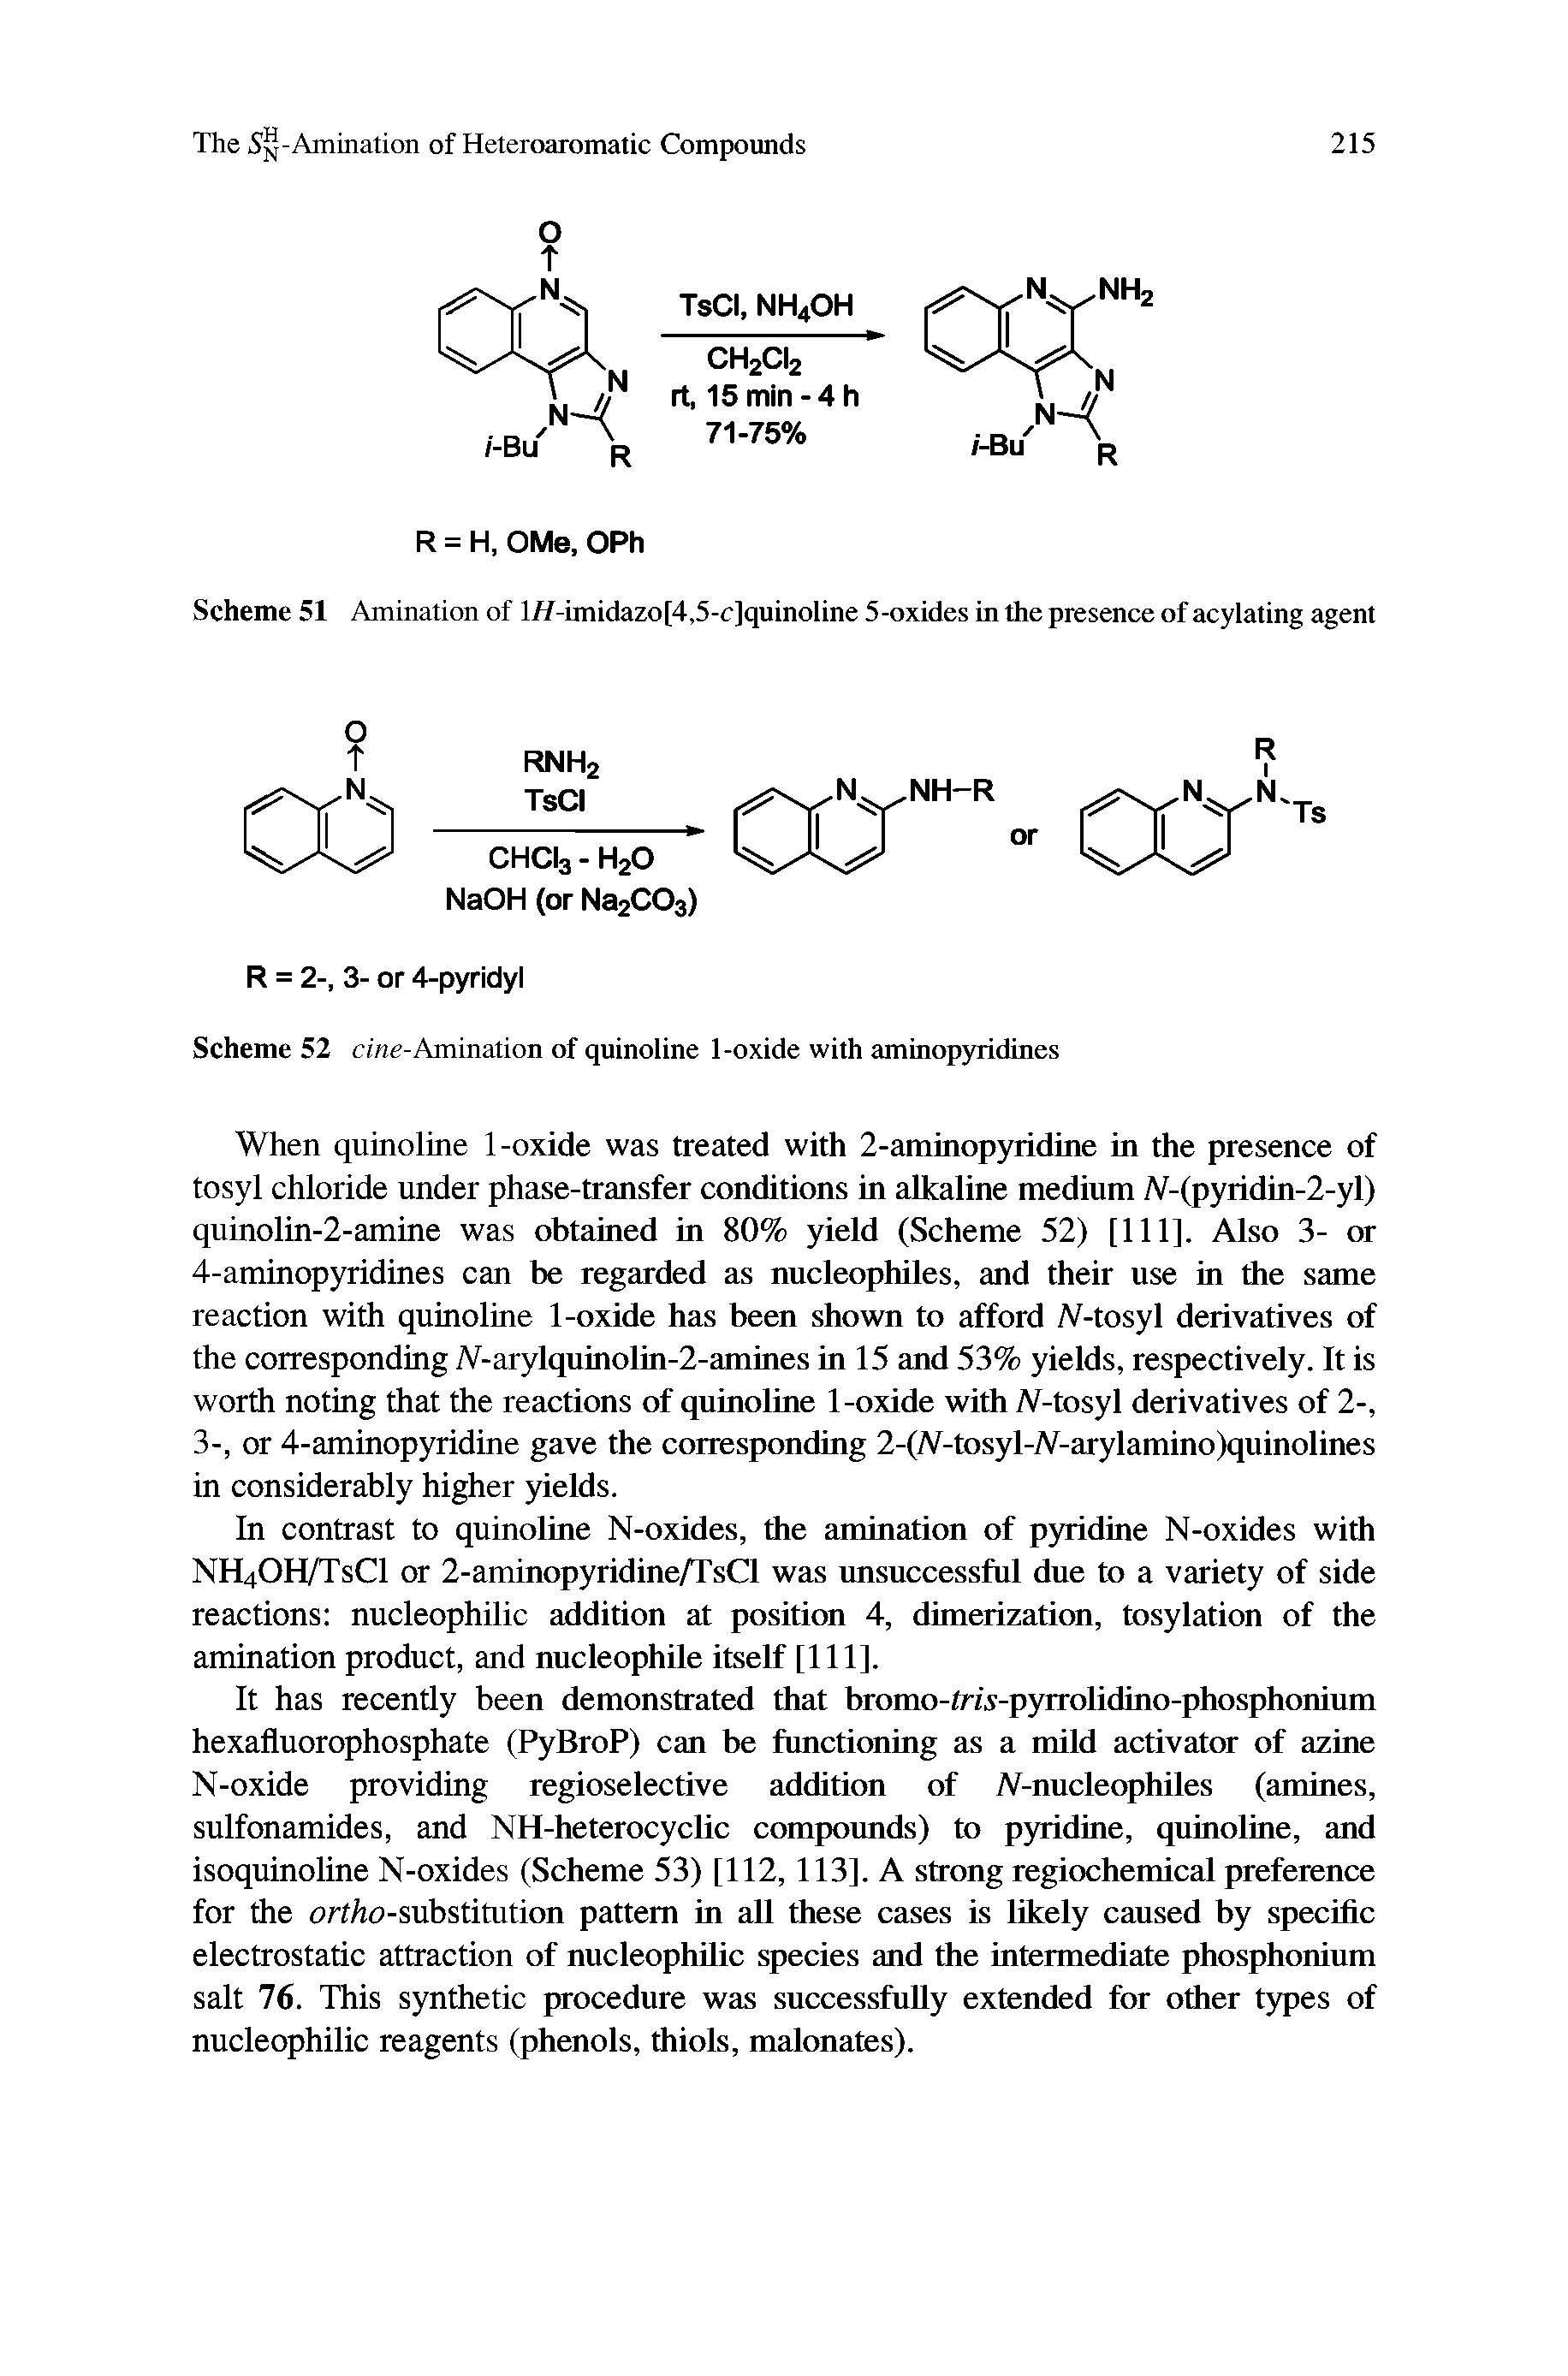 Scheme 51 Amination of l//-imidazo[4,5-c]quinoline 5-oxides in the presence of acylating agent...